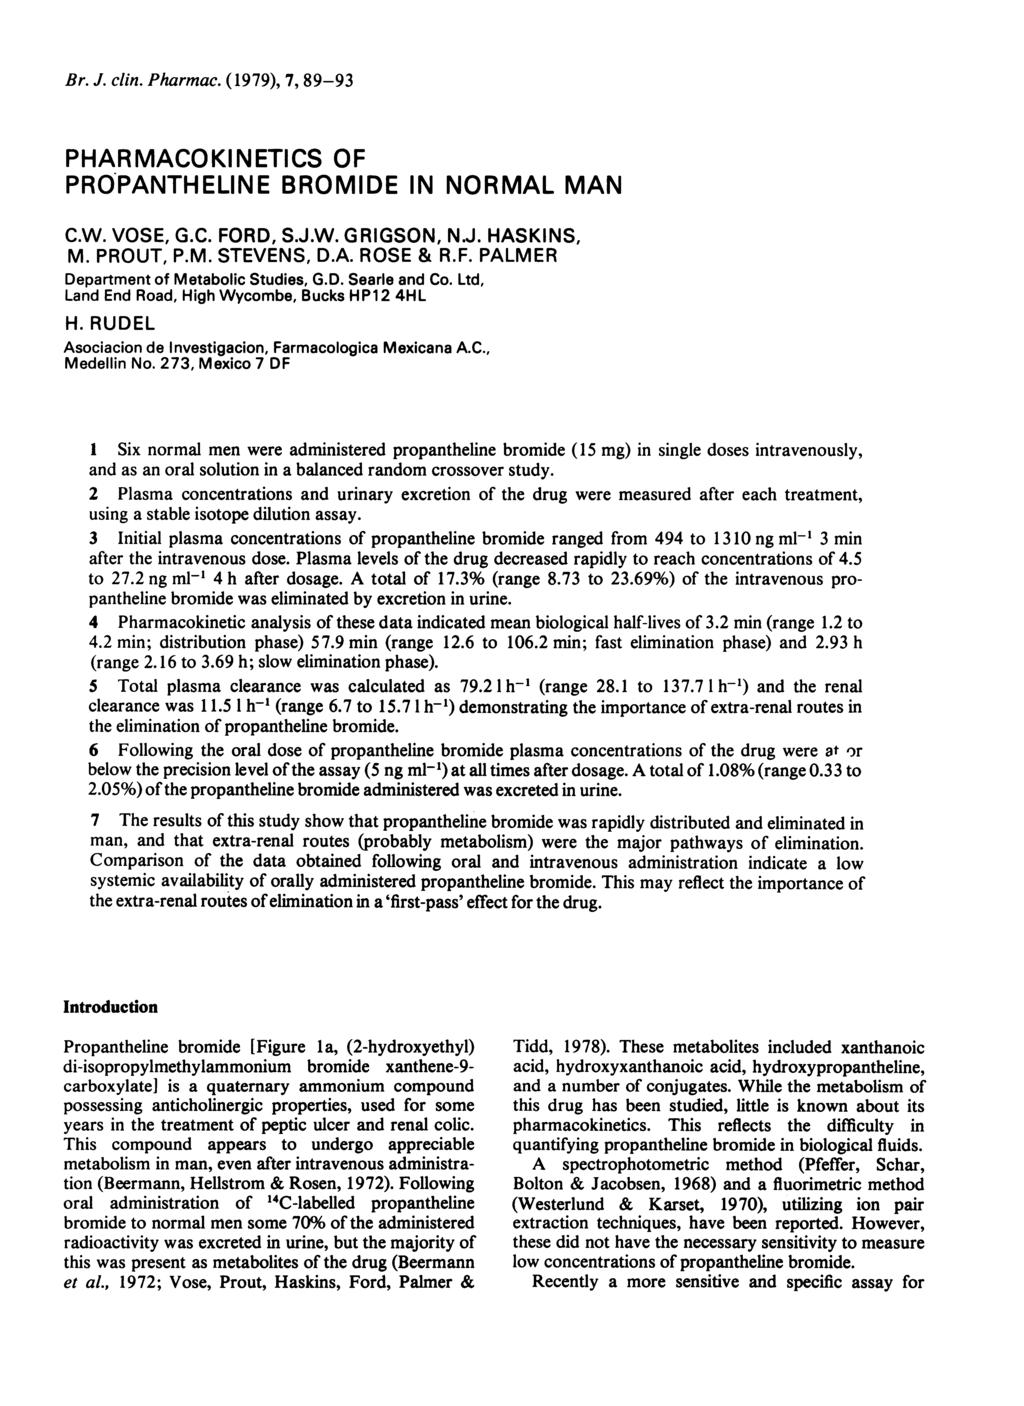 Br. J. clin. Pharmac. (1979), 7, 89-93 PHARMACOKINETICS OF PROPANTHELINE BROMIDE IN NORMAL MAN C.W. VOSE, G.C. FORD, S.J.W. GRIGSON, N.J. HASKINS, M. PROUT, P.M. STEVENS, D.A. ROSE & R.F. PALMER Department of Metabolic Studies, G.